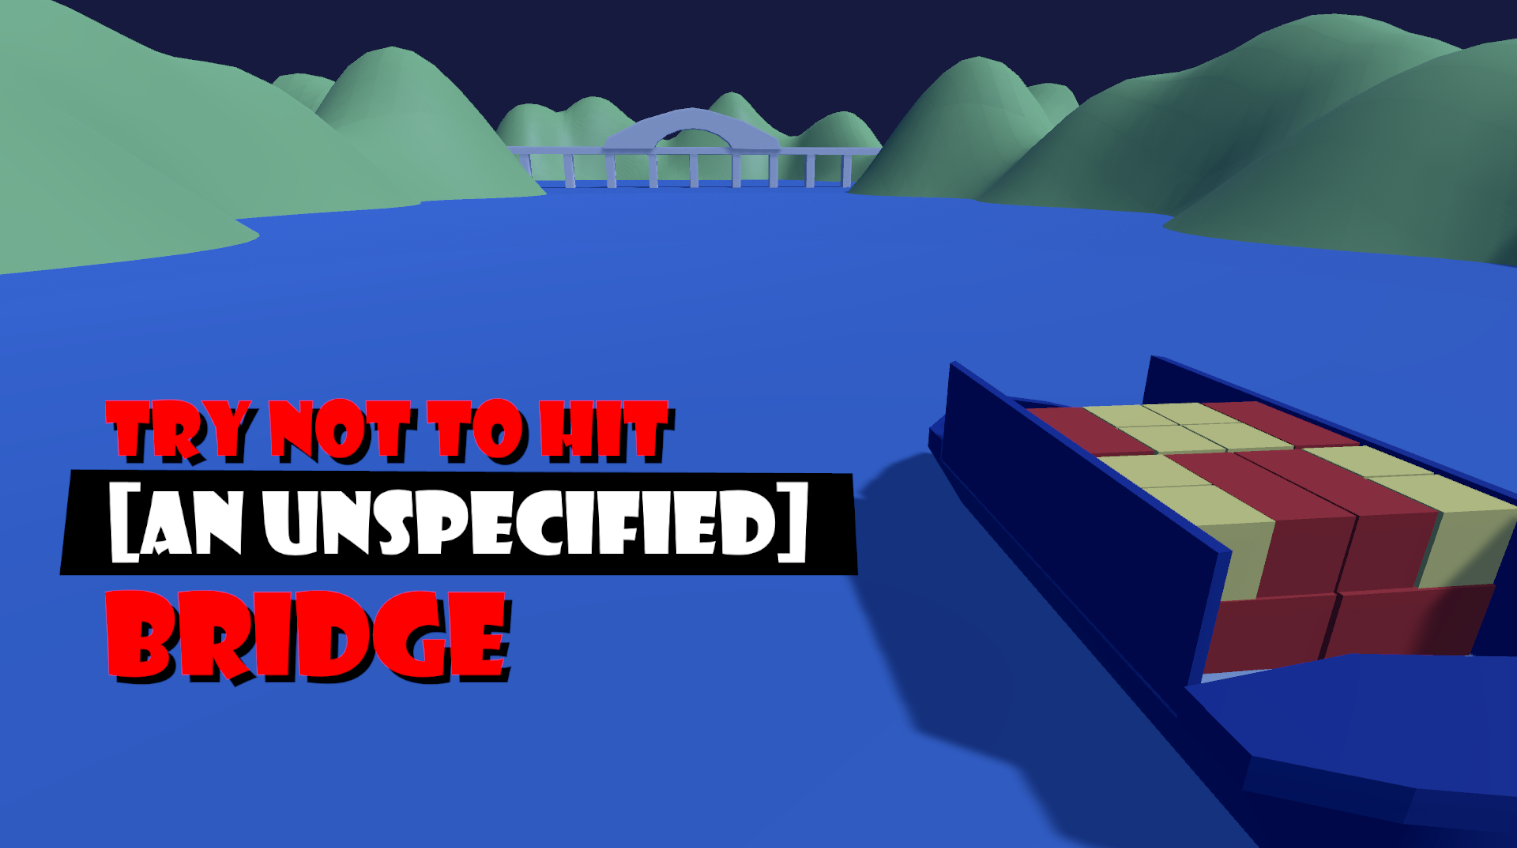 Try Not To Hit [An Unspecified] Bridge